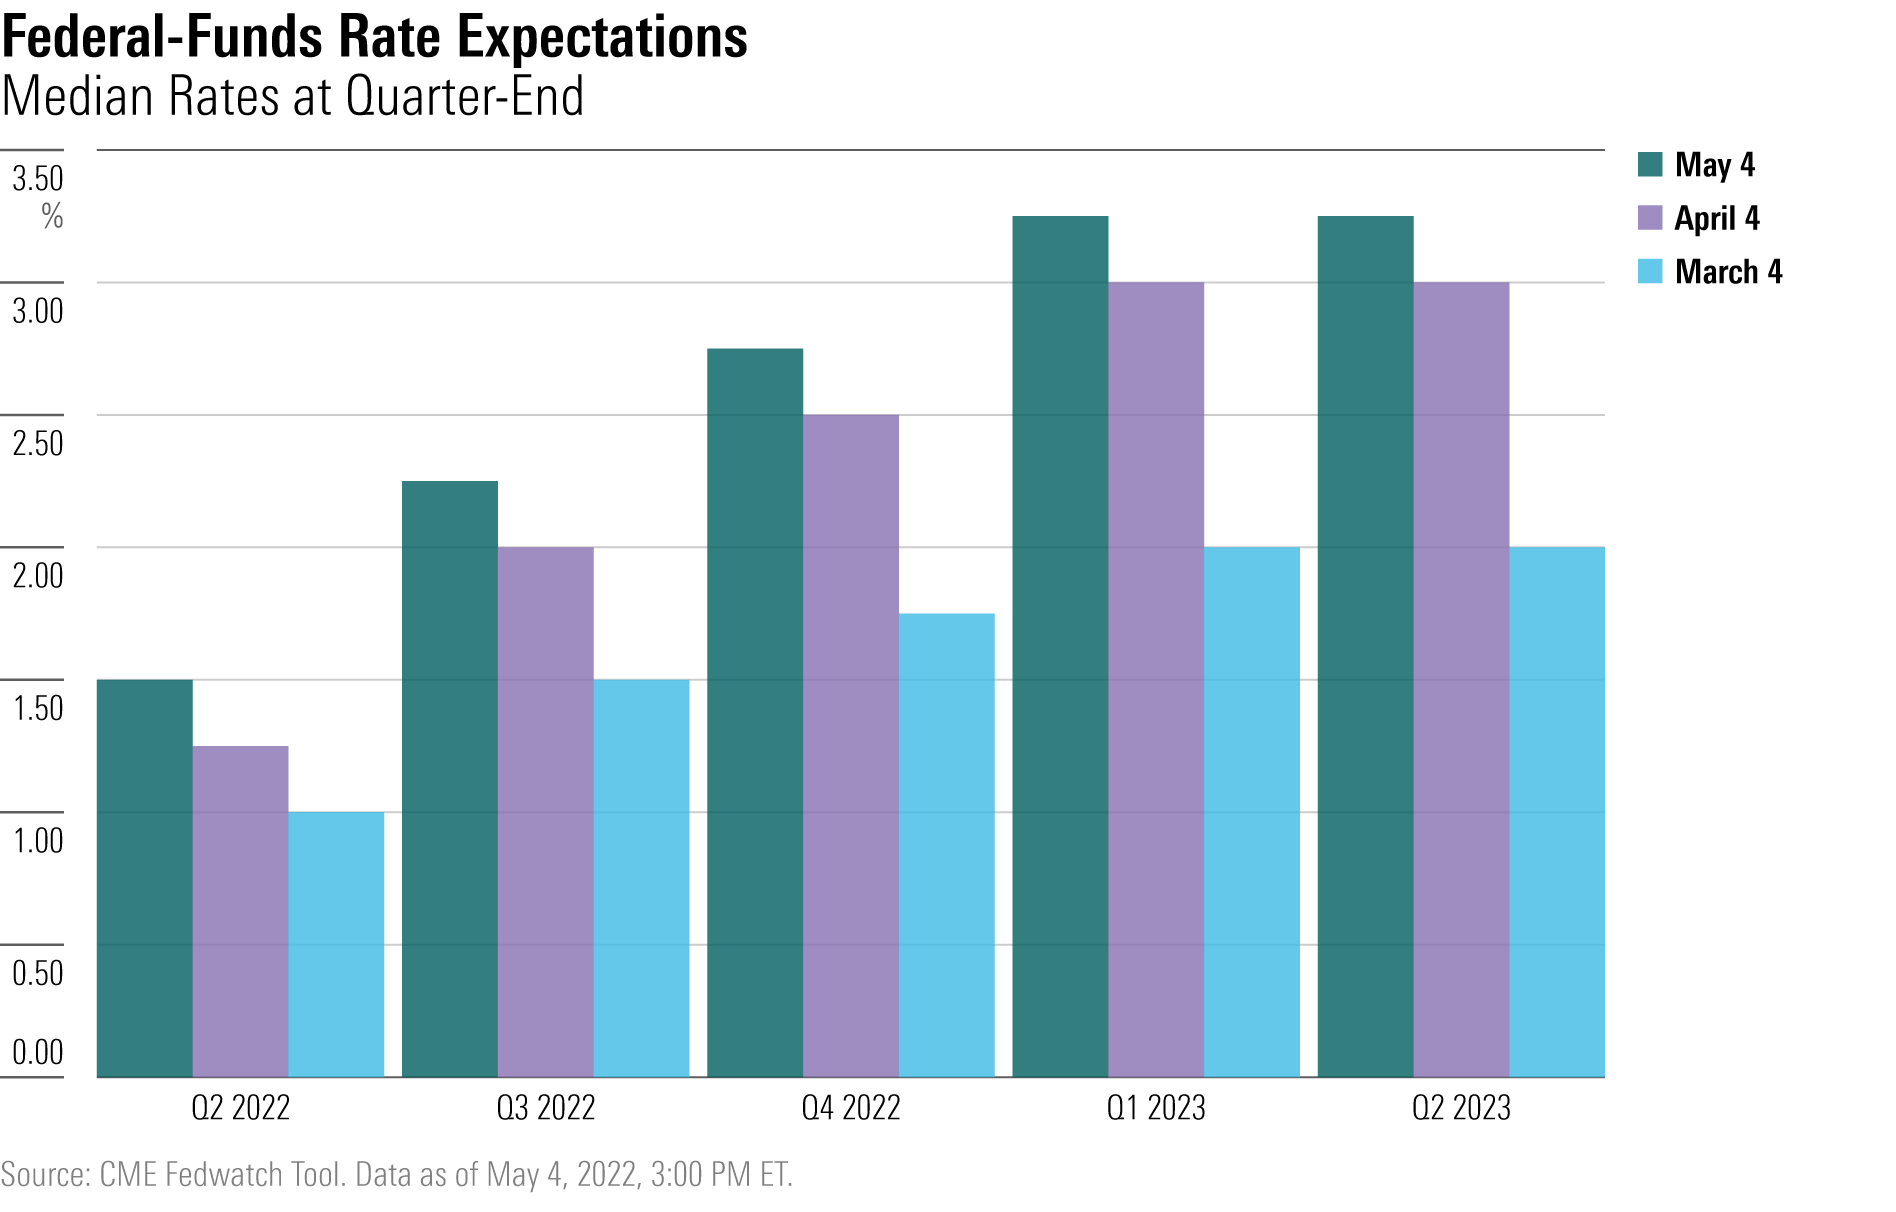 Federal-Funds Rate Expectations graph